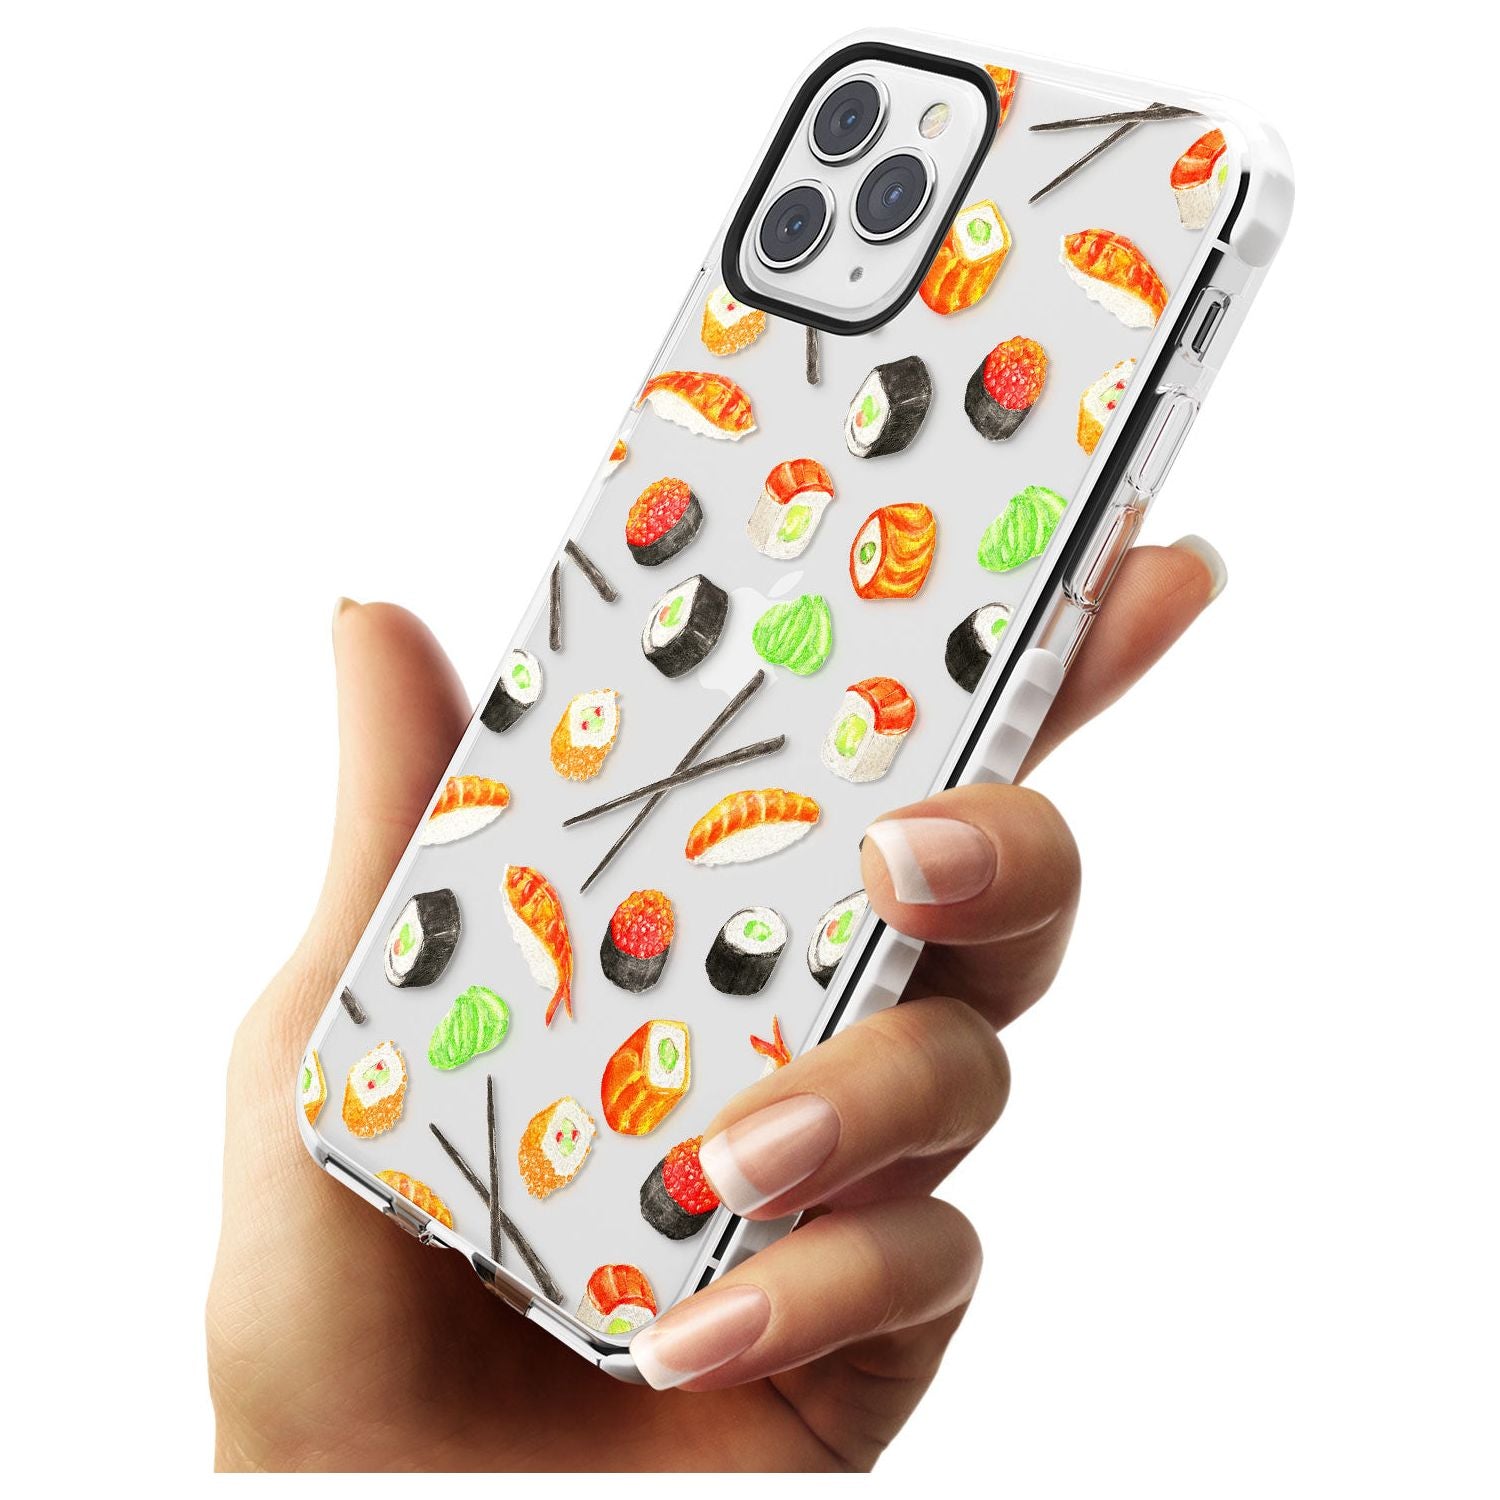 Sushi & Chopsticks Watercolour Pattern Impact Phone Case for iPhone 11 Pro Max